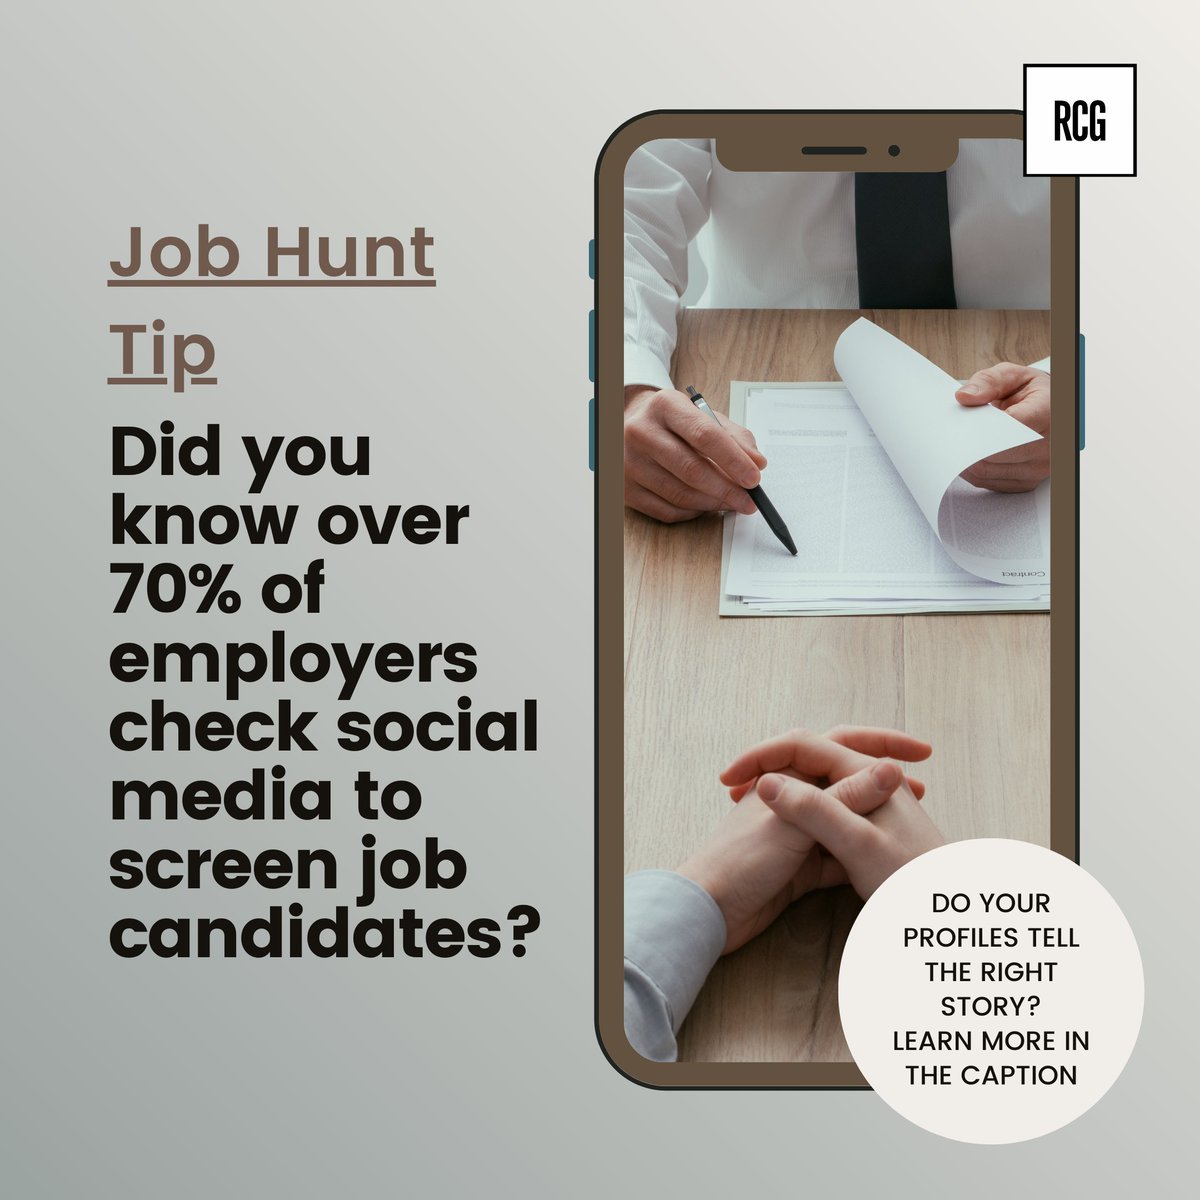 Your profiles should reflect your professional best while showcasing your genuine self. 🌟💼

Your digital footprint is crucial in your job hunt. Time to clean up your feed and tags!🚫👻

#DidYouKnow #SocialMediaImpact #JobSearchStrategy #DigitalPersona #ProfessionalImage